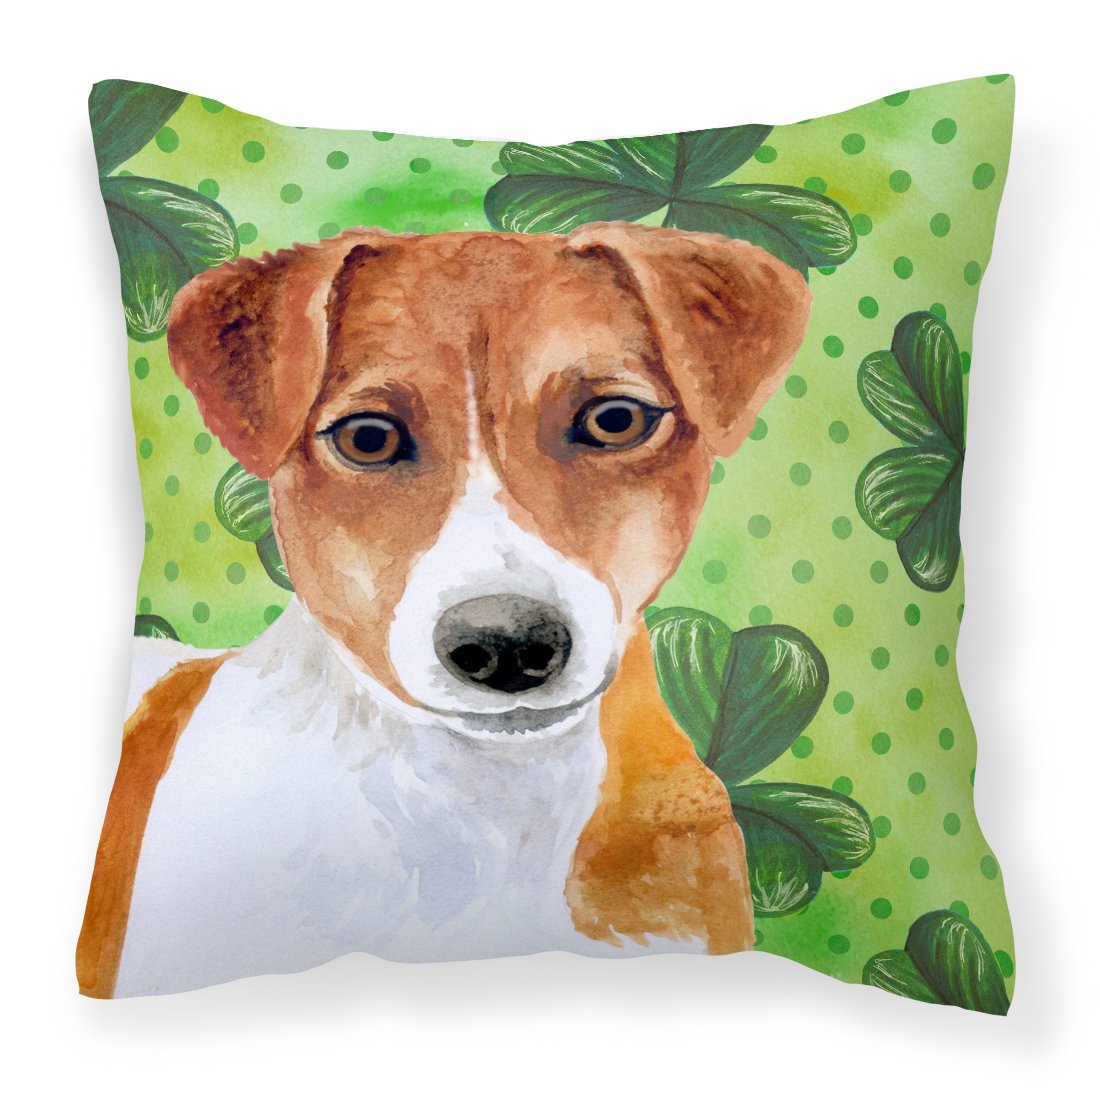 Jack Russell Terrier St Patrick's Fabric Decorative Pillow BB9863PW1818 by Caroline's Treasures